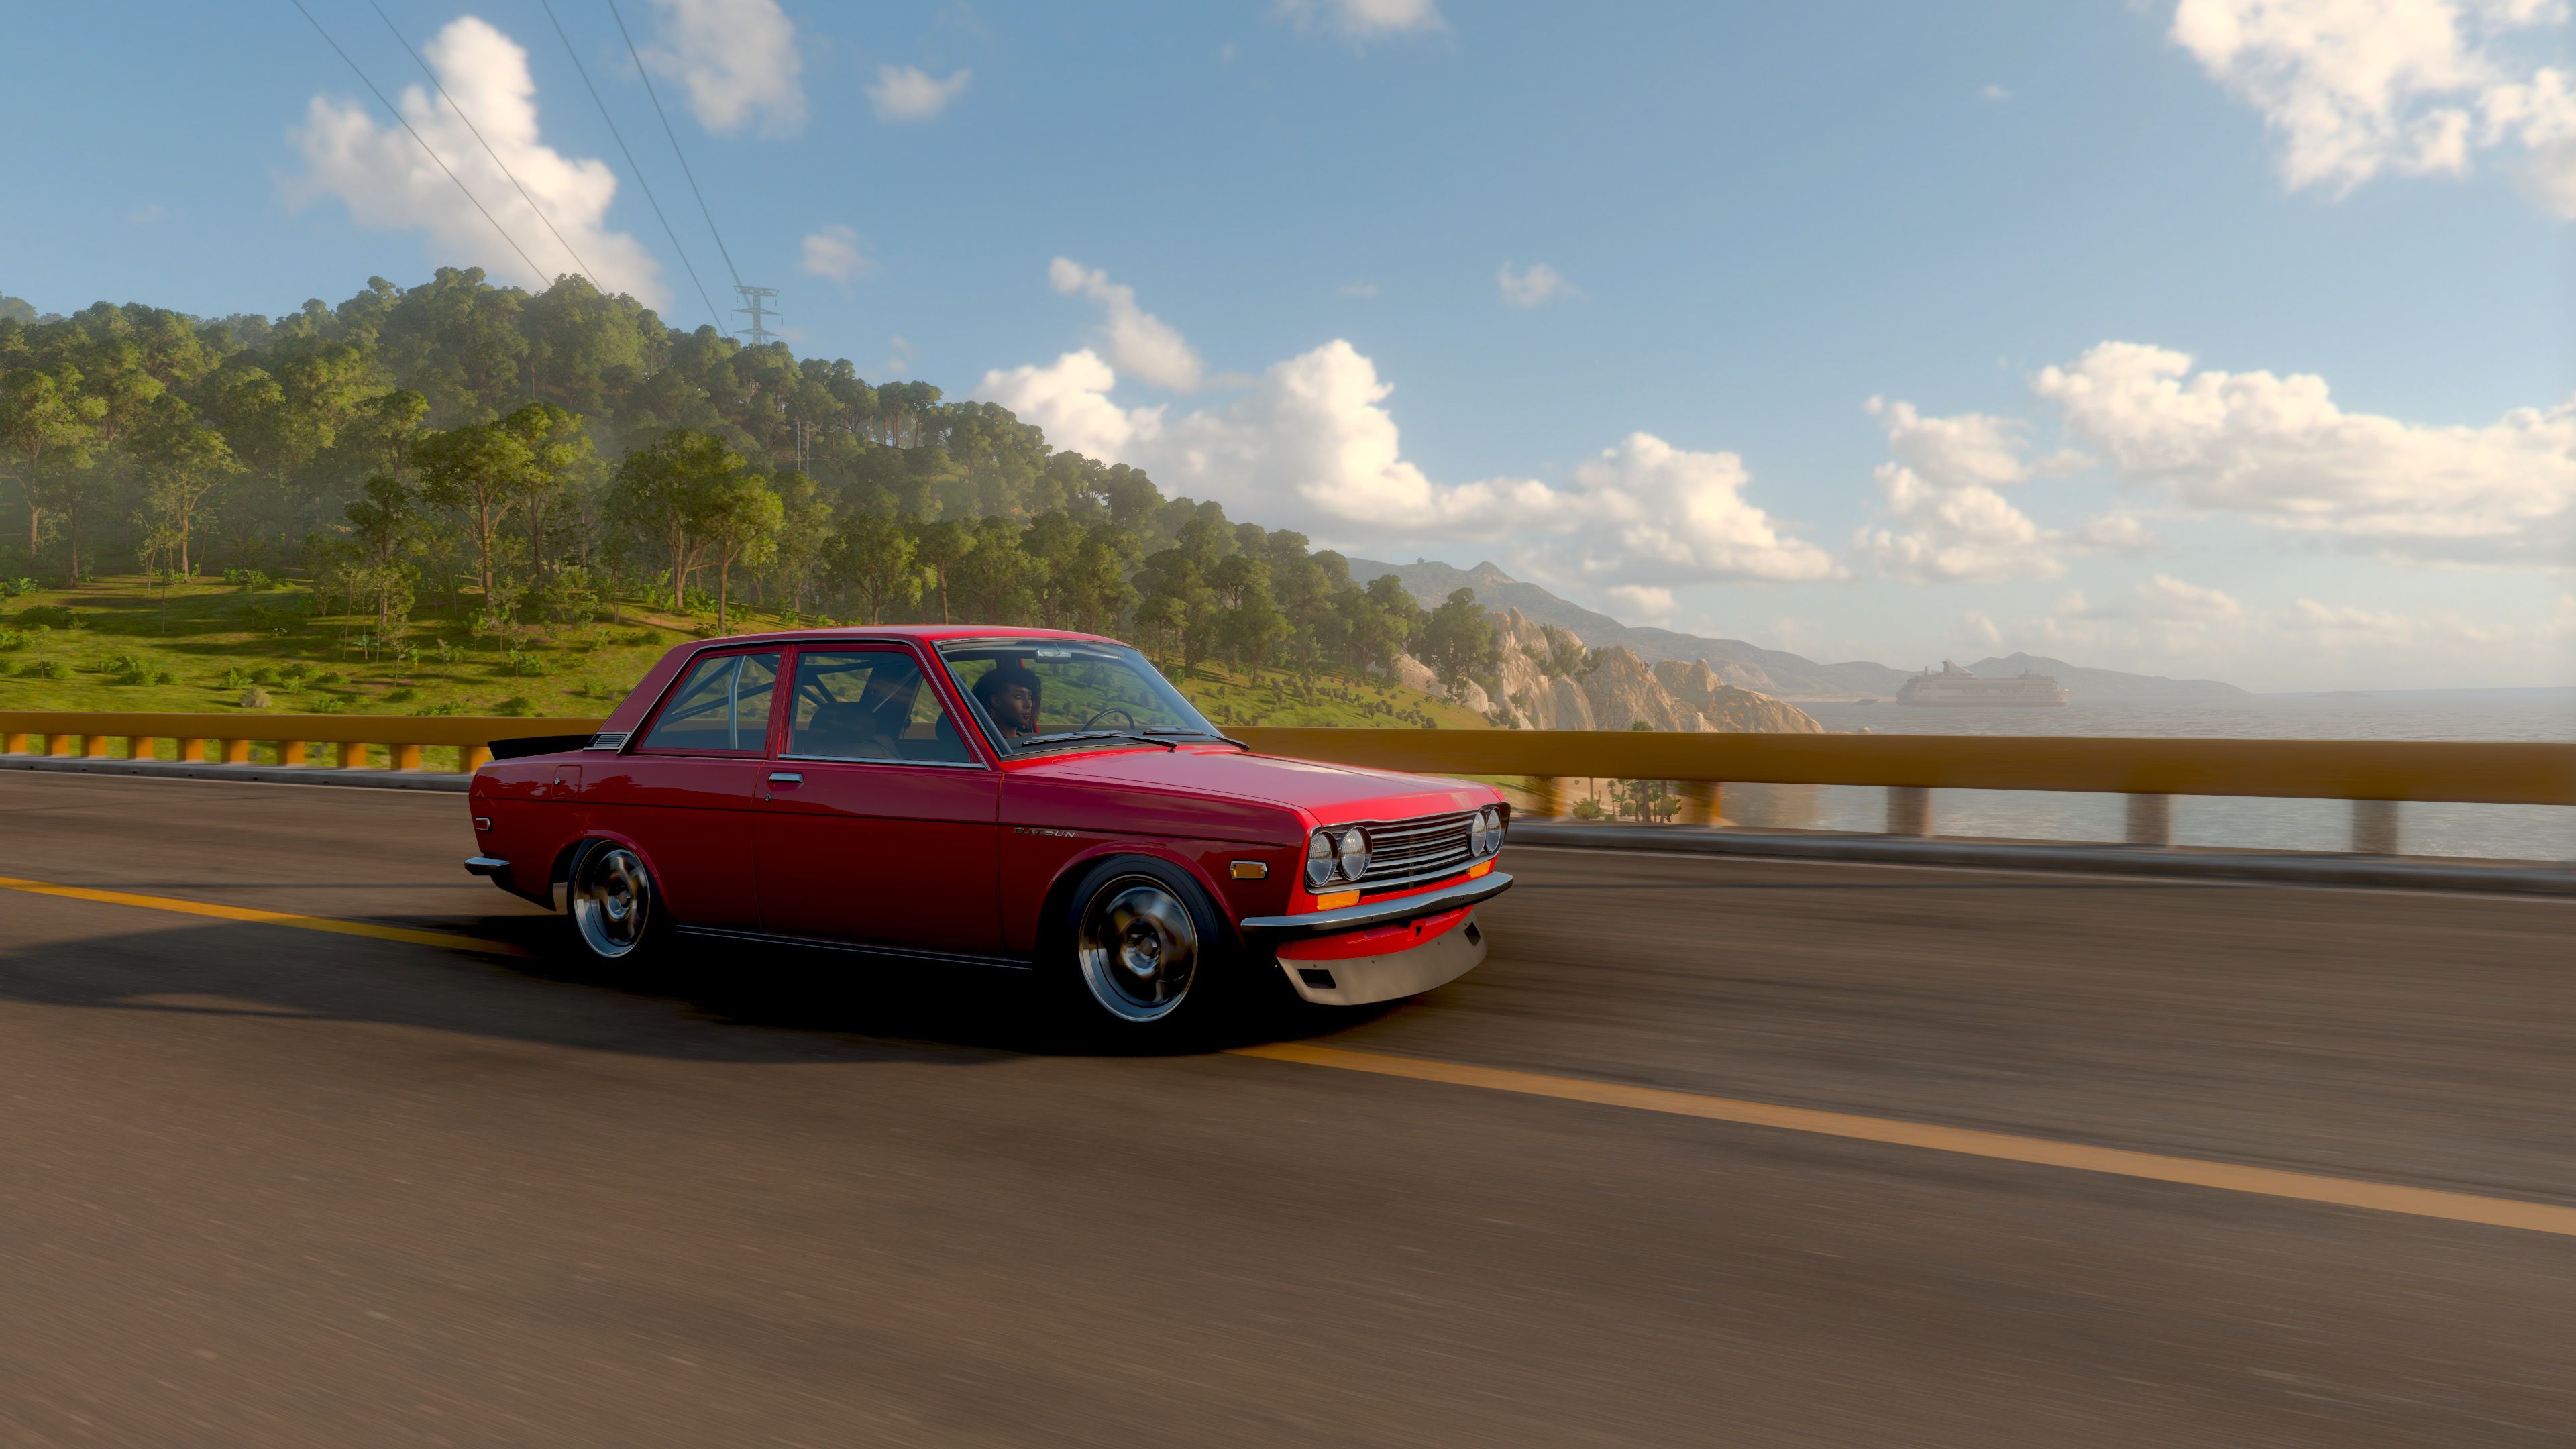 A screenshot from Forza Horizon 5, it's a three-quarter-profile action shot of my red Datsun that's been lowered and has sweet-looking rims on it driving across a bridge. The sky is blue with fluffy clouds, and there's bright green trees over the shoreline behind the bridge.